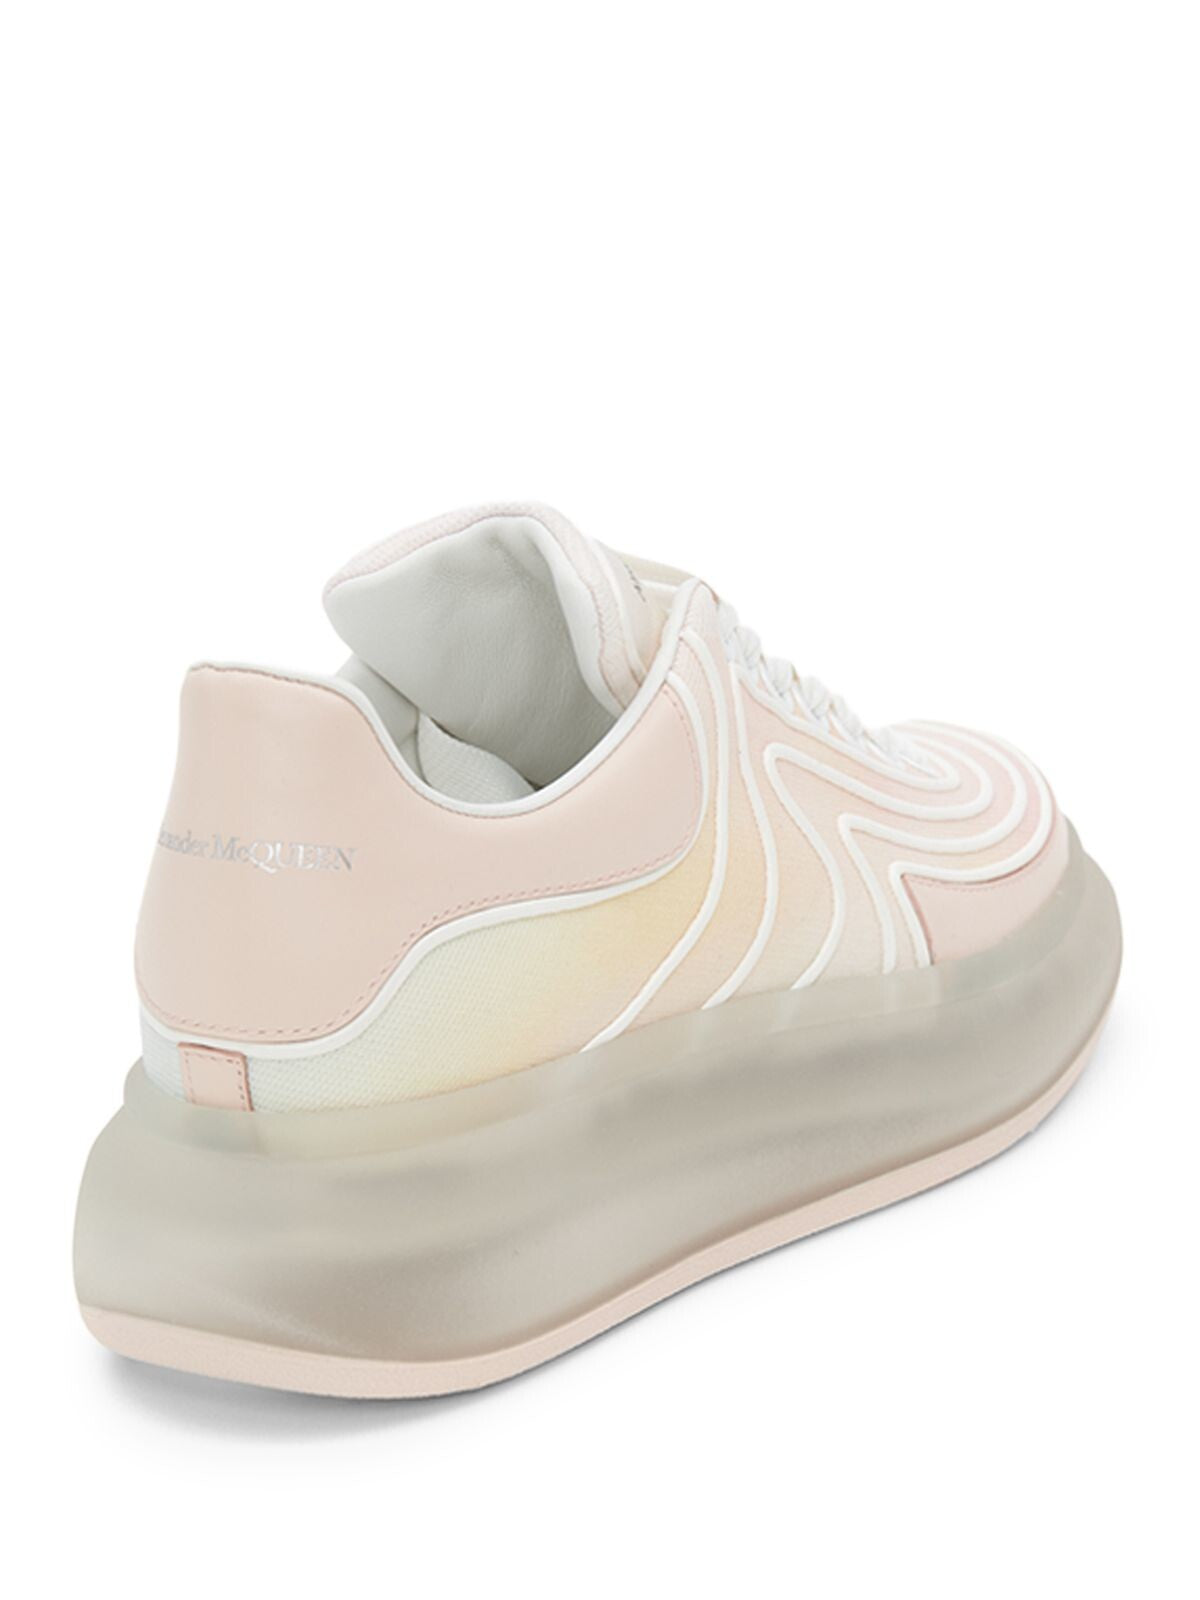 ALEXANDER MCQUEEN Womens Pink Translucent Sole Logo Comfort Mixed Media Round Toe Wedge Lace-Up Sneakers Shoes 38